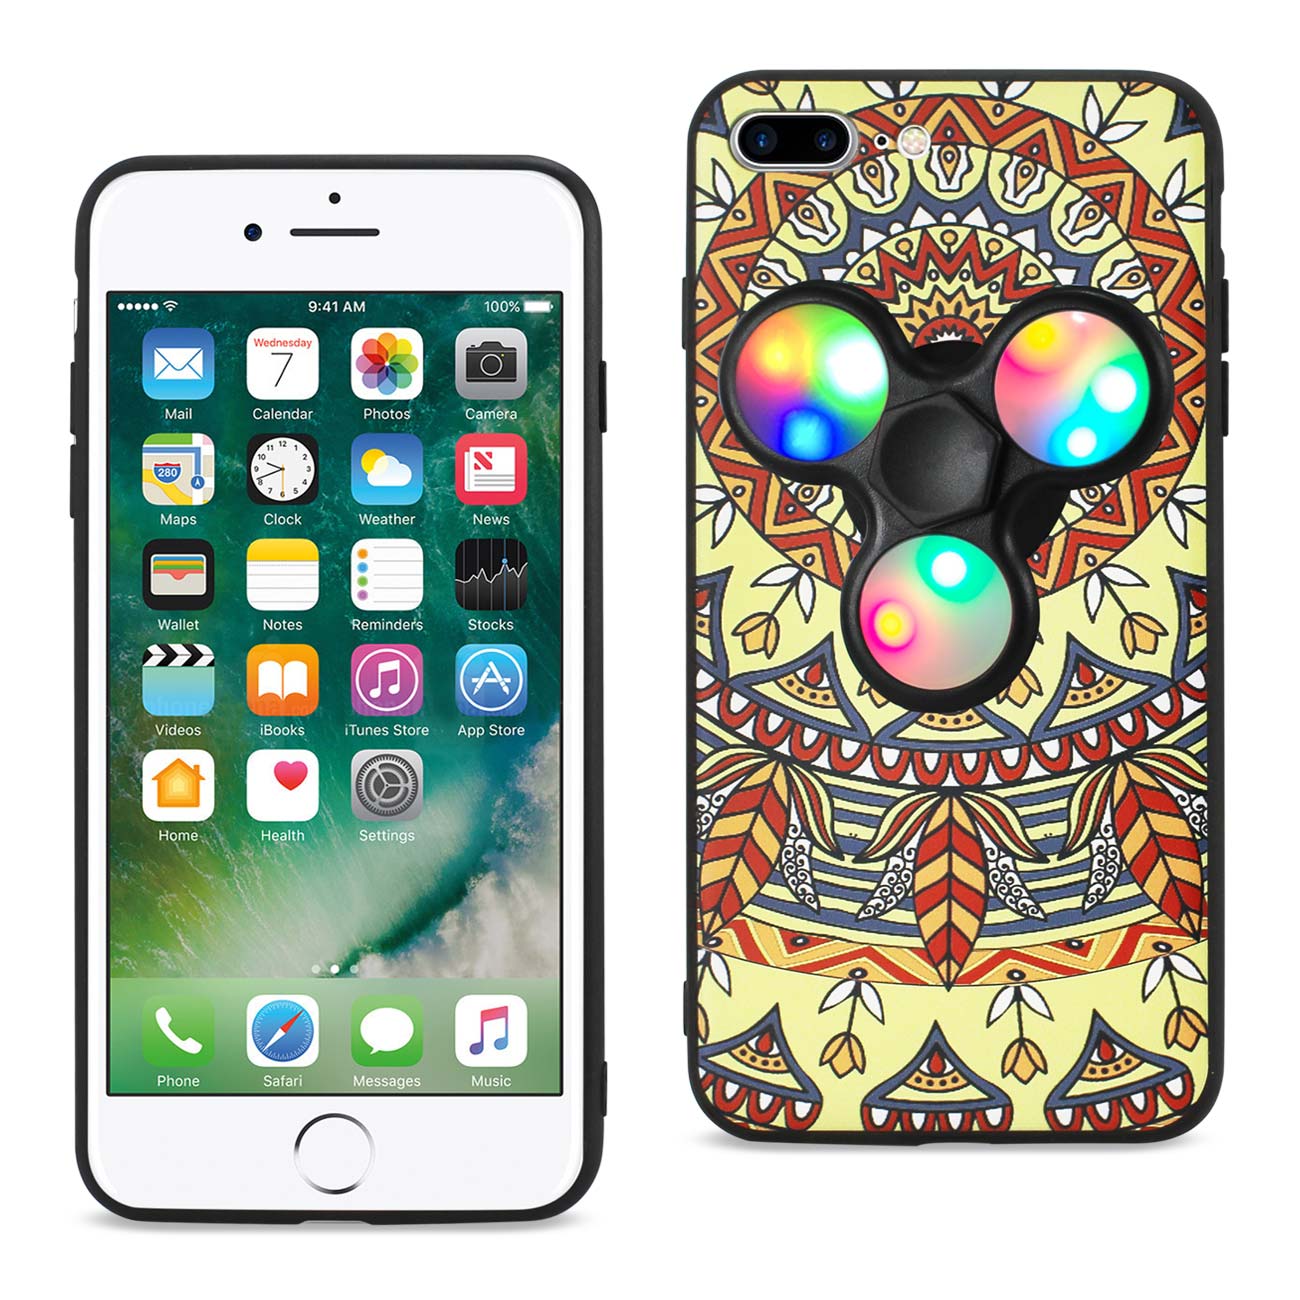 Design The Inspiration Of Terre iPhone 7 Plus Case With Led Fidget Spinner Clip On In Saffron